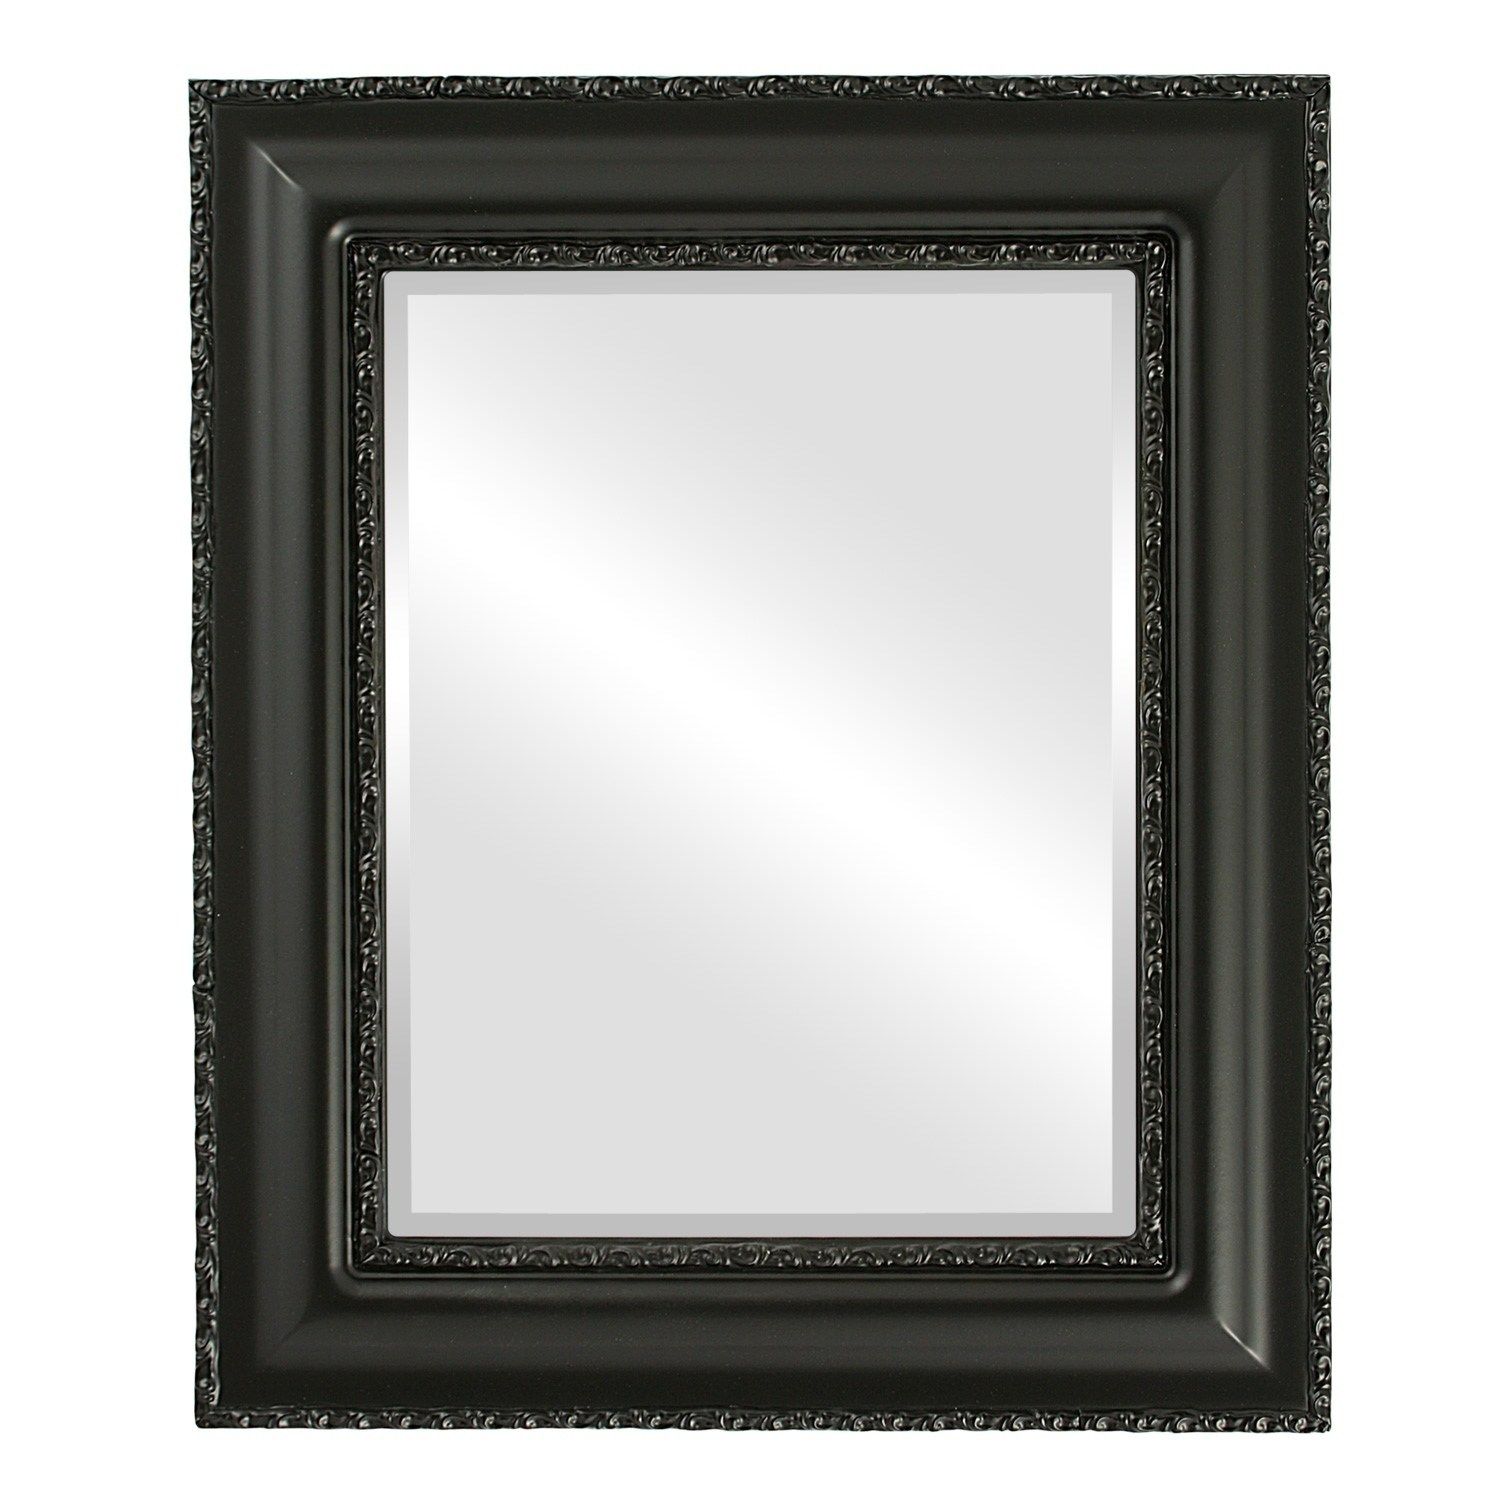 The Oval And Round Mirror Store Somerset Framed Rectangle Mirror In Inside Matte Black Metal Oval Wall Mirrors (View 15 of 15)